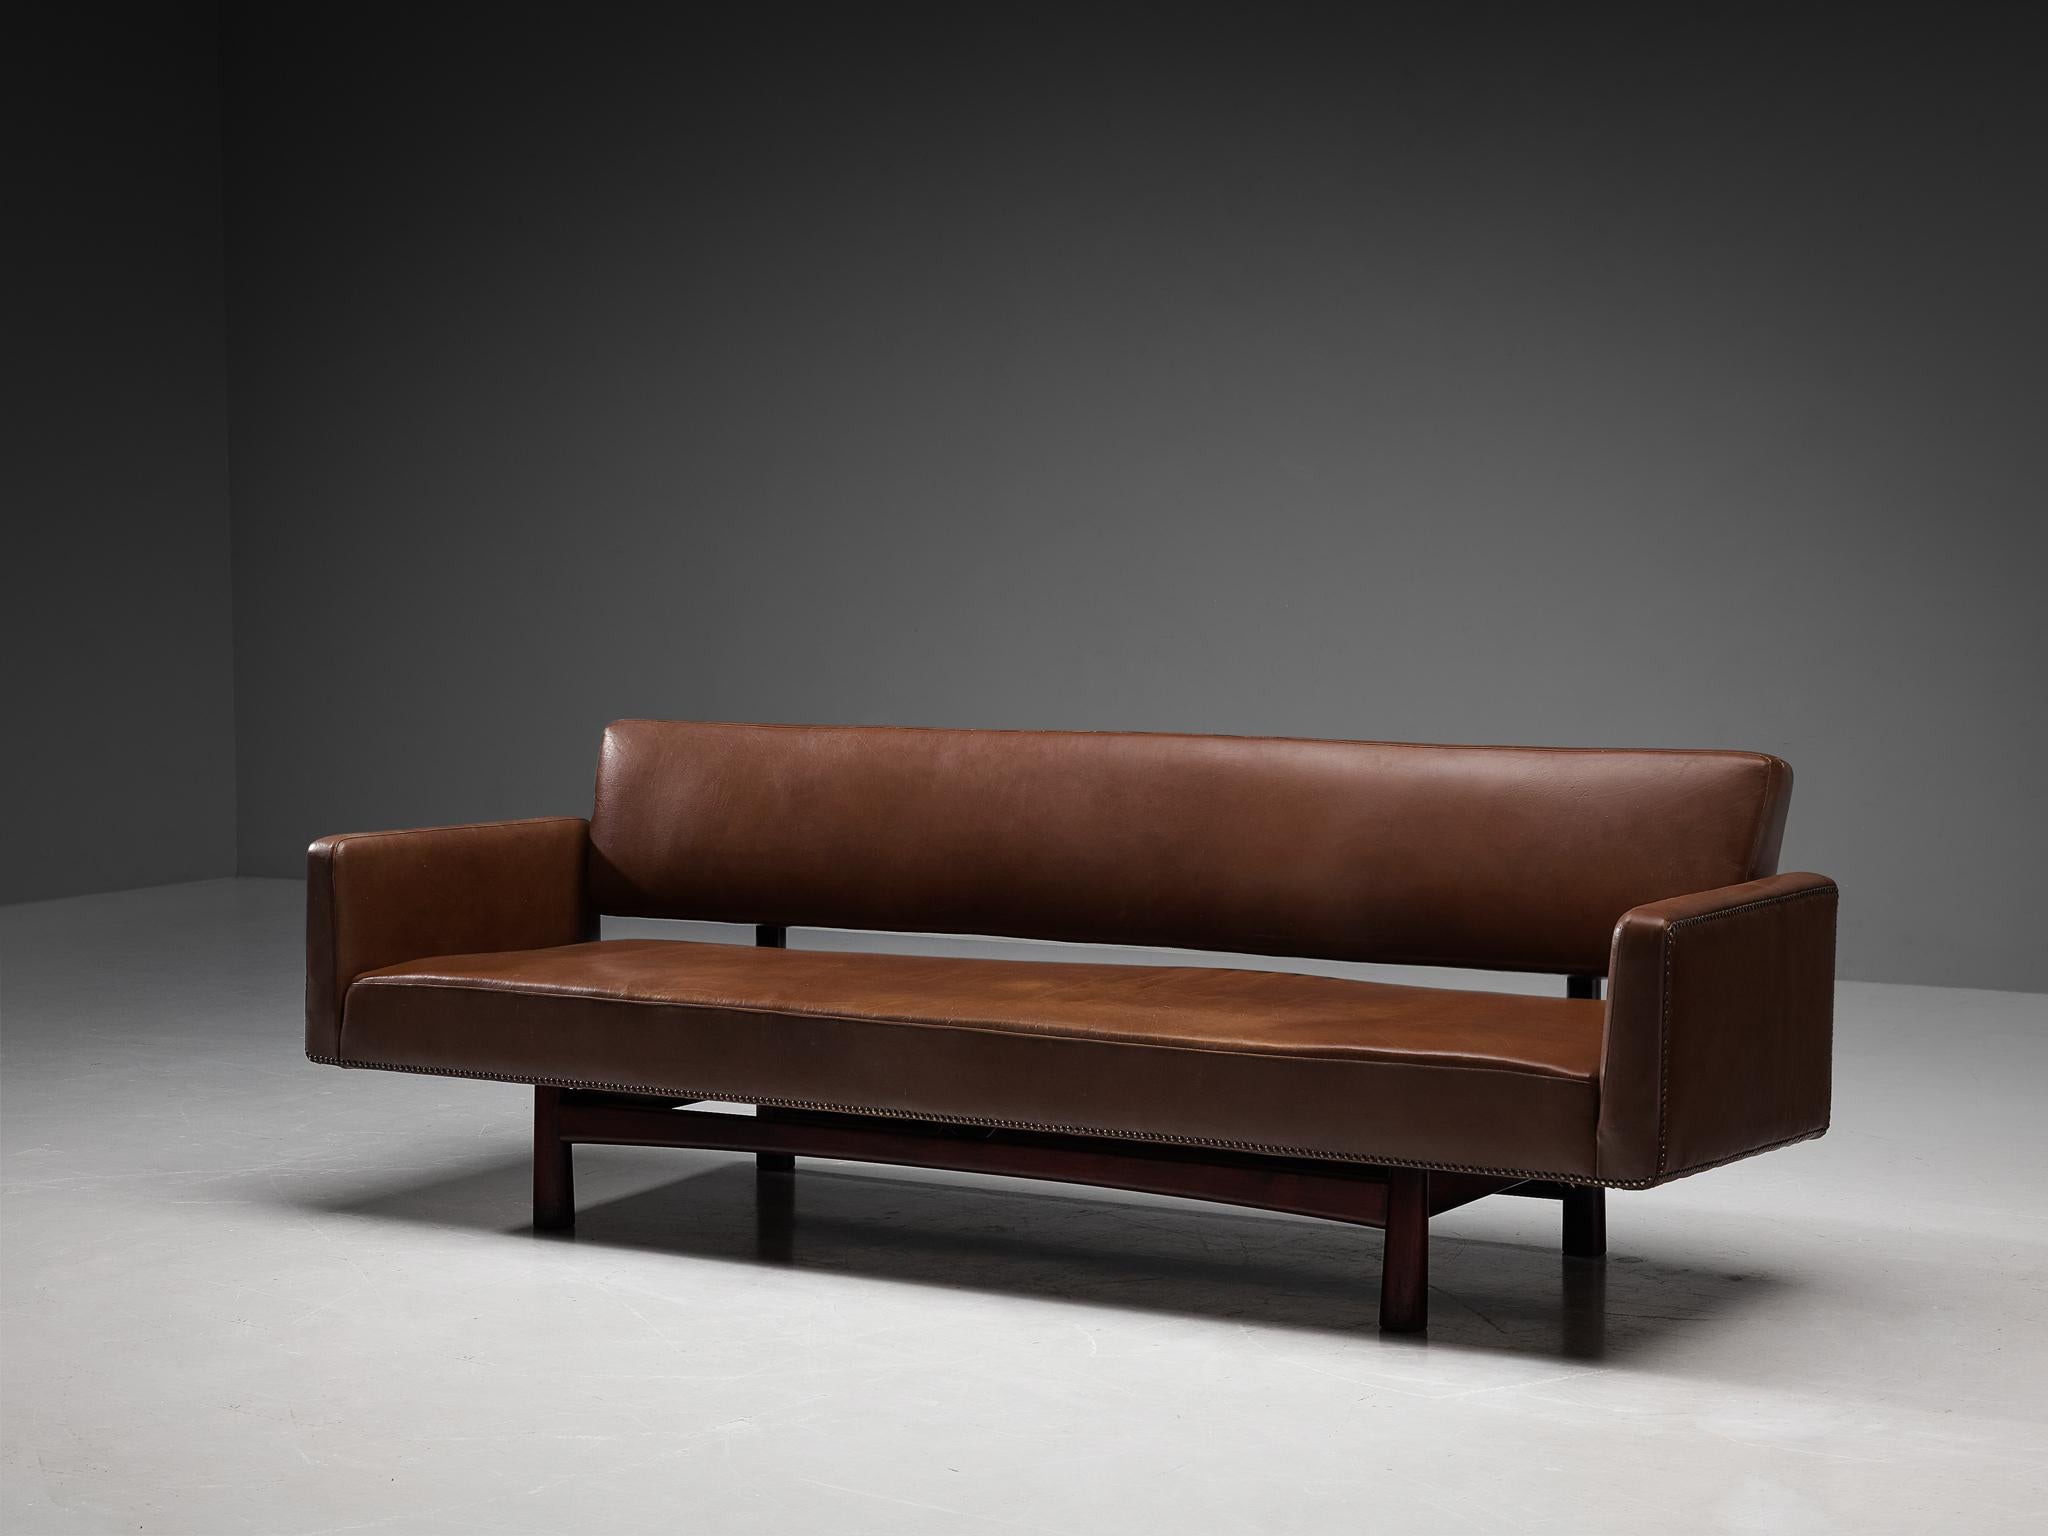 Edward Wormley for Dunbar Furniture / DUX of Sweden, sofa model 5316, faux leather, metal, wood, United States, design 1952

This three-seat sofa was designed by Edward Wormley for Dunbar in 1952. The eye-catching leatherette with metal studs that